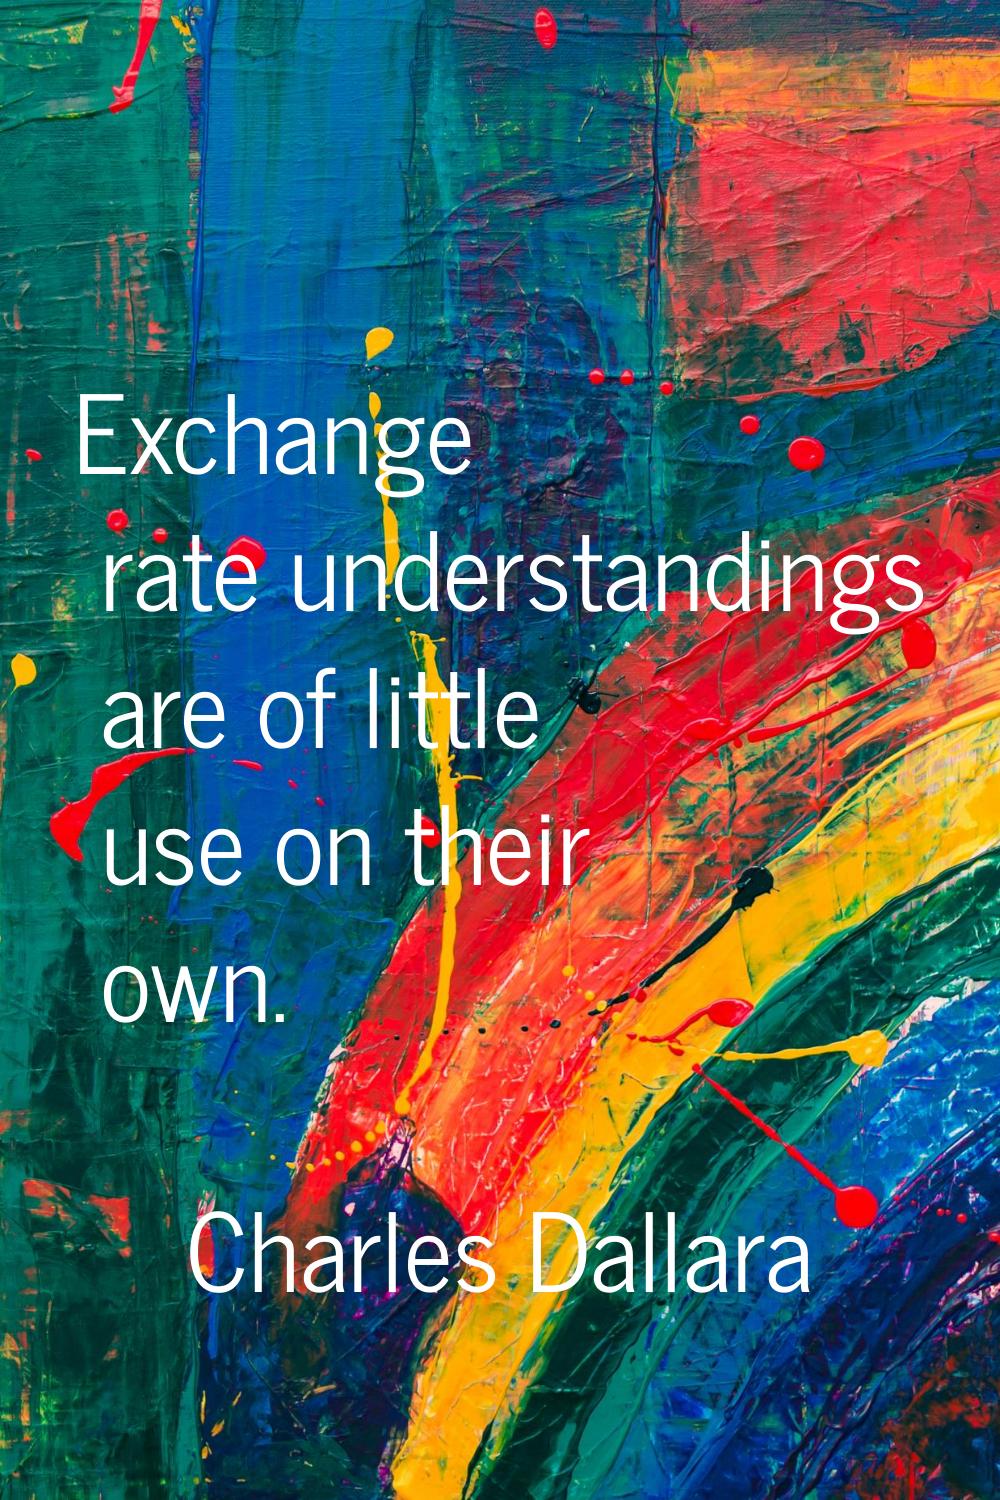 Exchange rate understandings are of little use on their own.